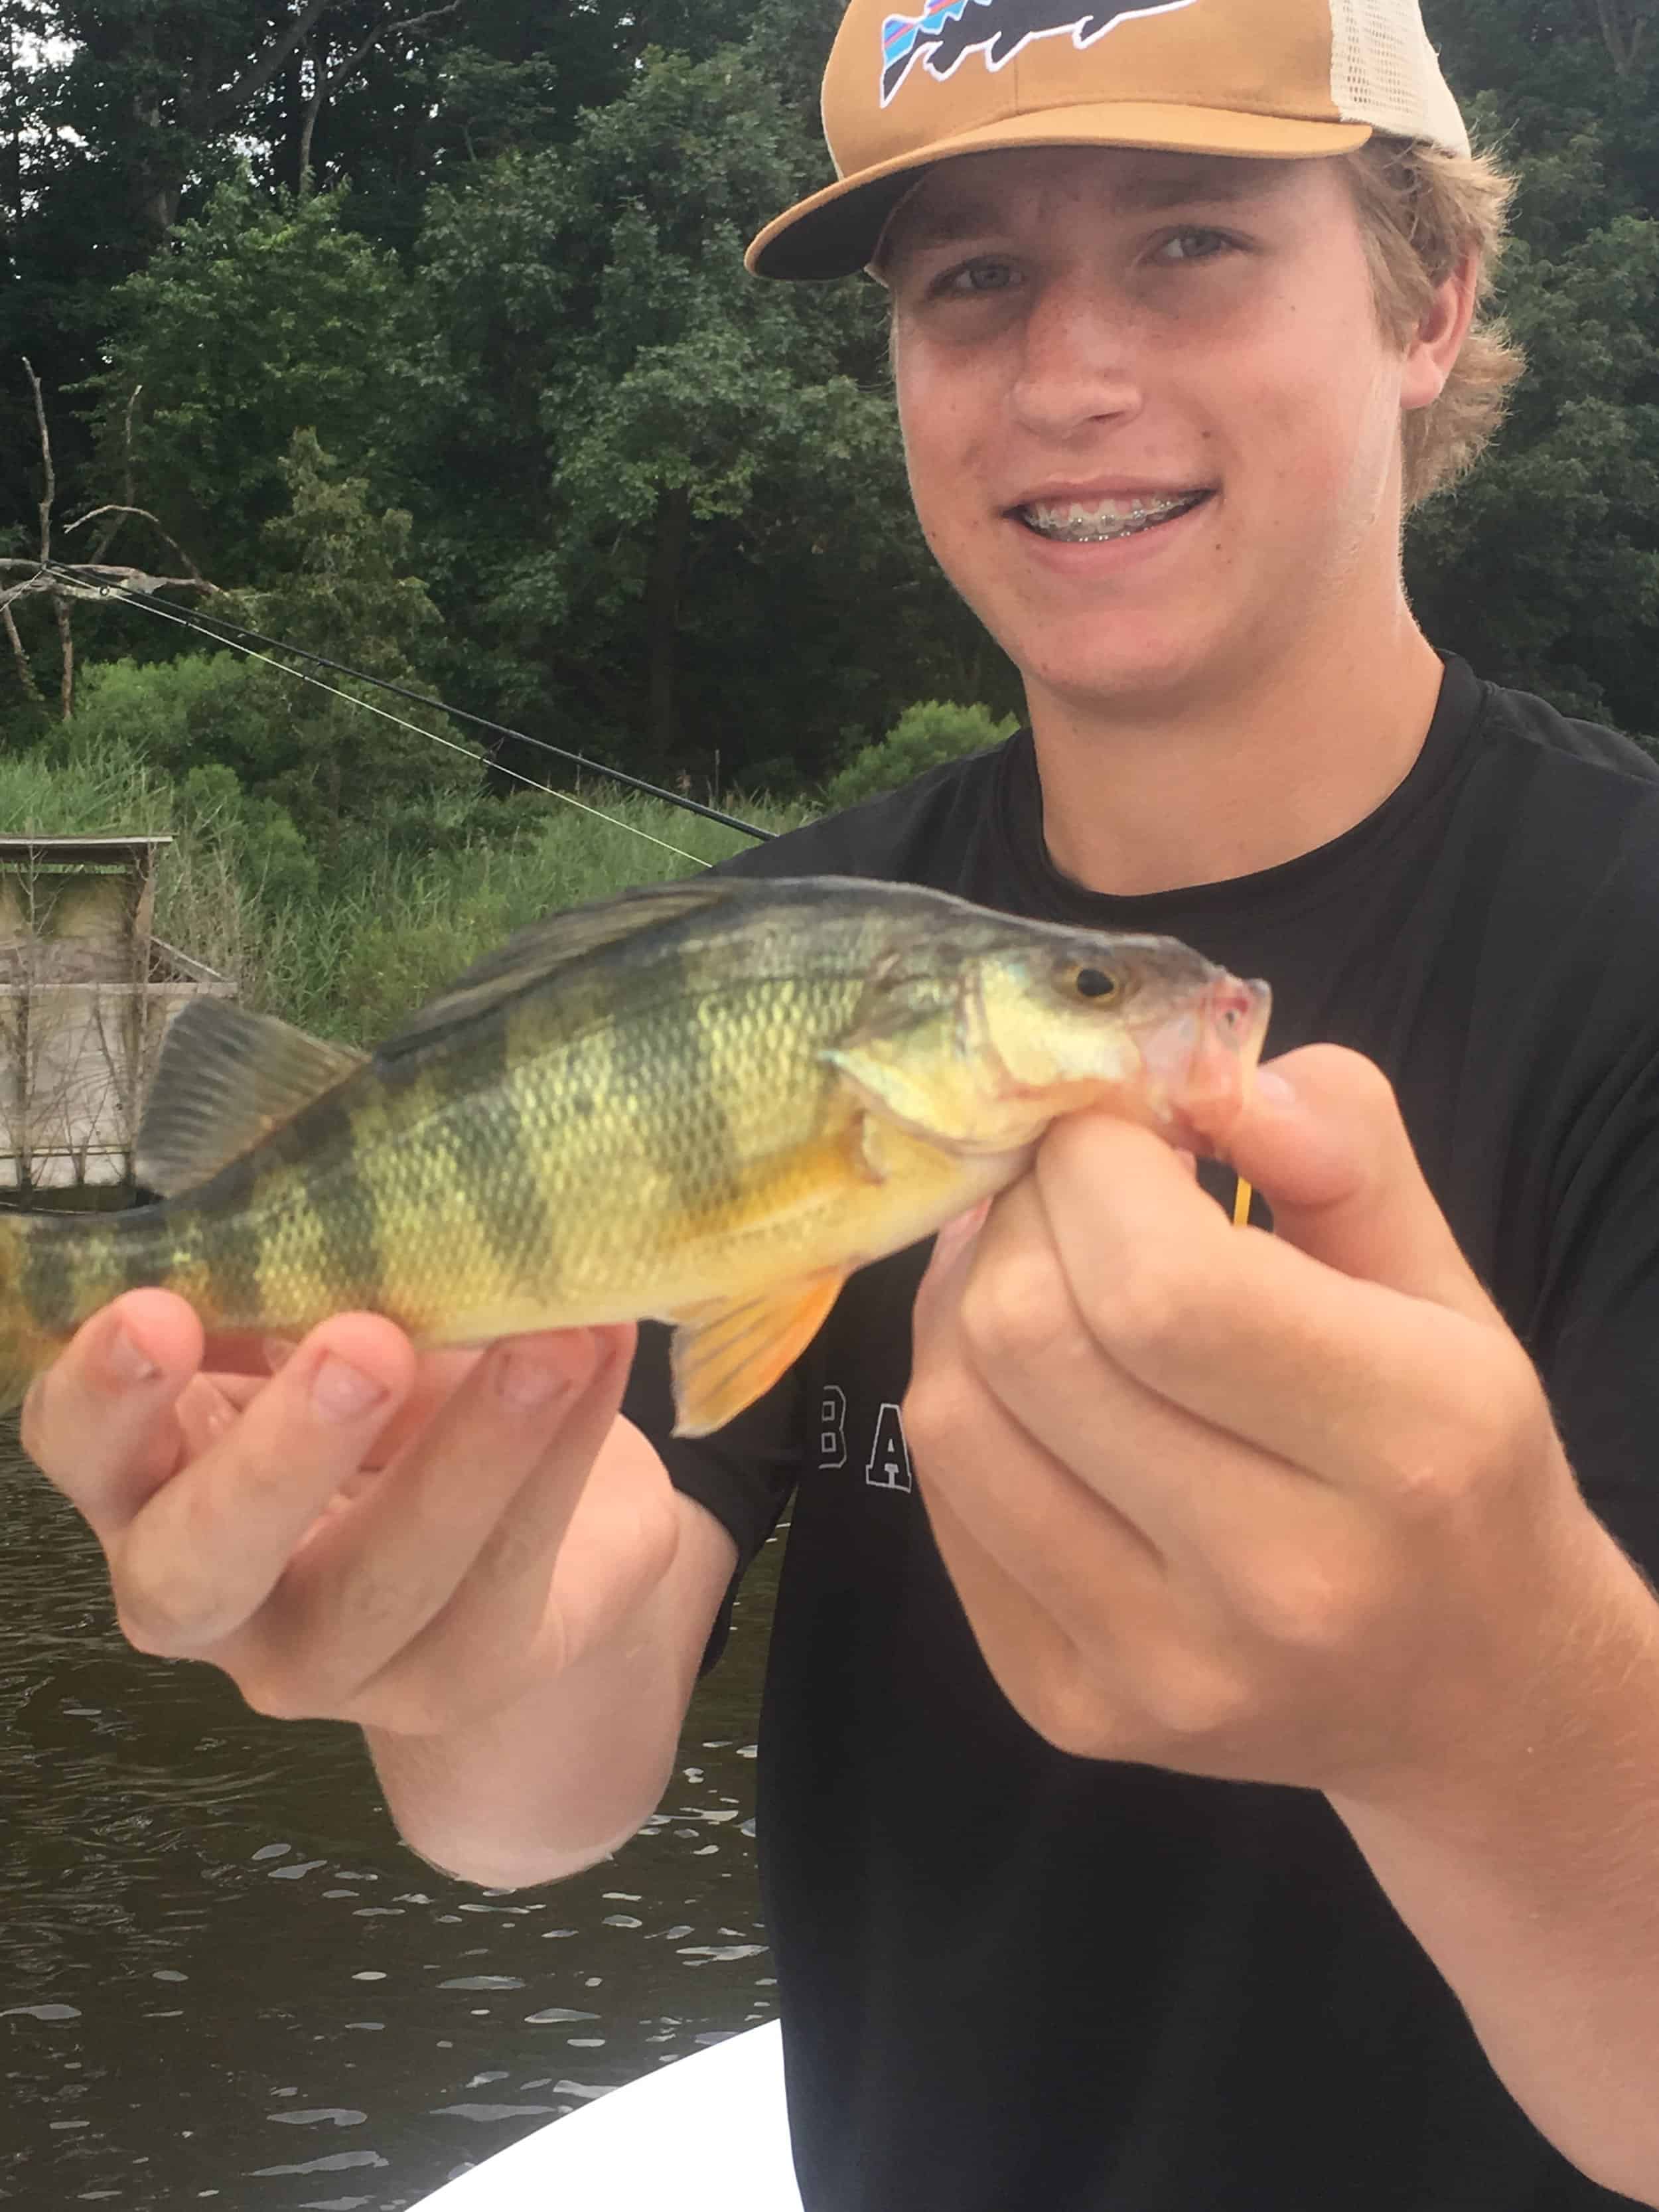  The Bay rivers are teeming with fish, from yellow and white perch to river herring and rockfish. This is Max Hart from Texas. (Photo credit Capt. Chris D. Dollar/CD Outdoors) 